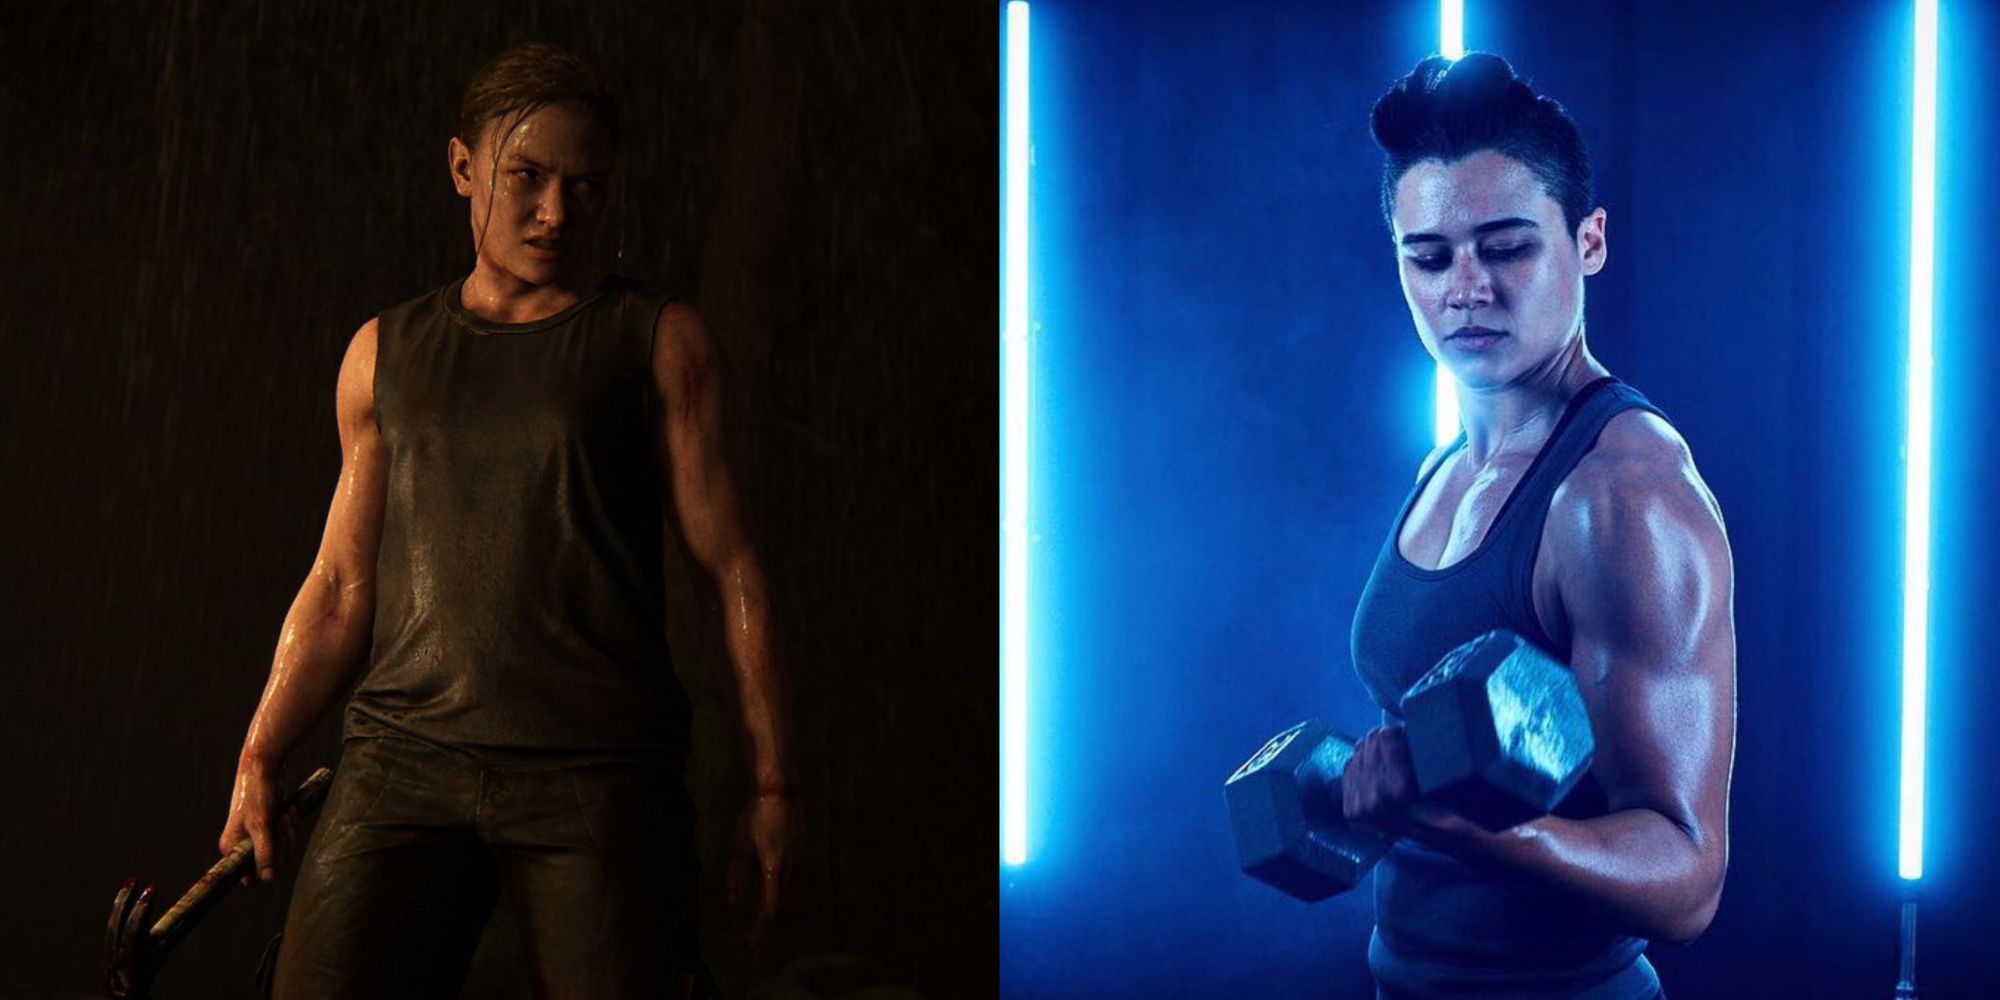 abby in the last of us, and katy o'brian